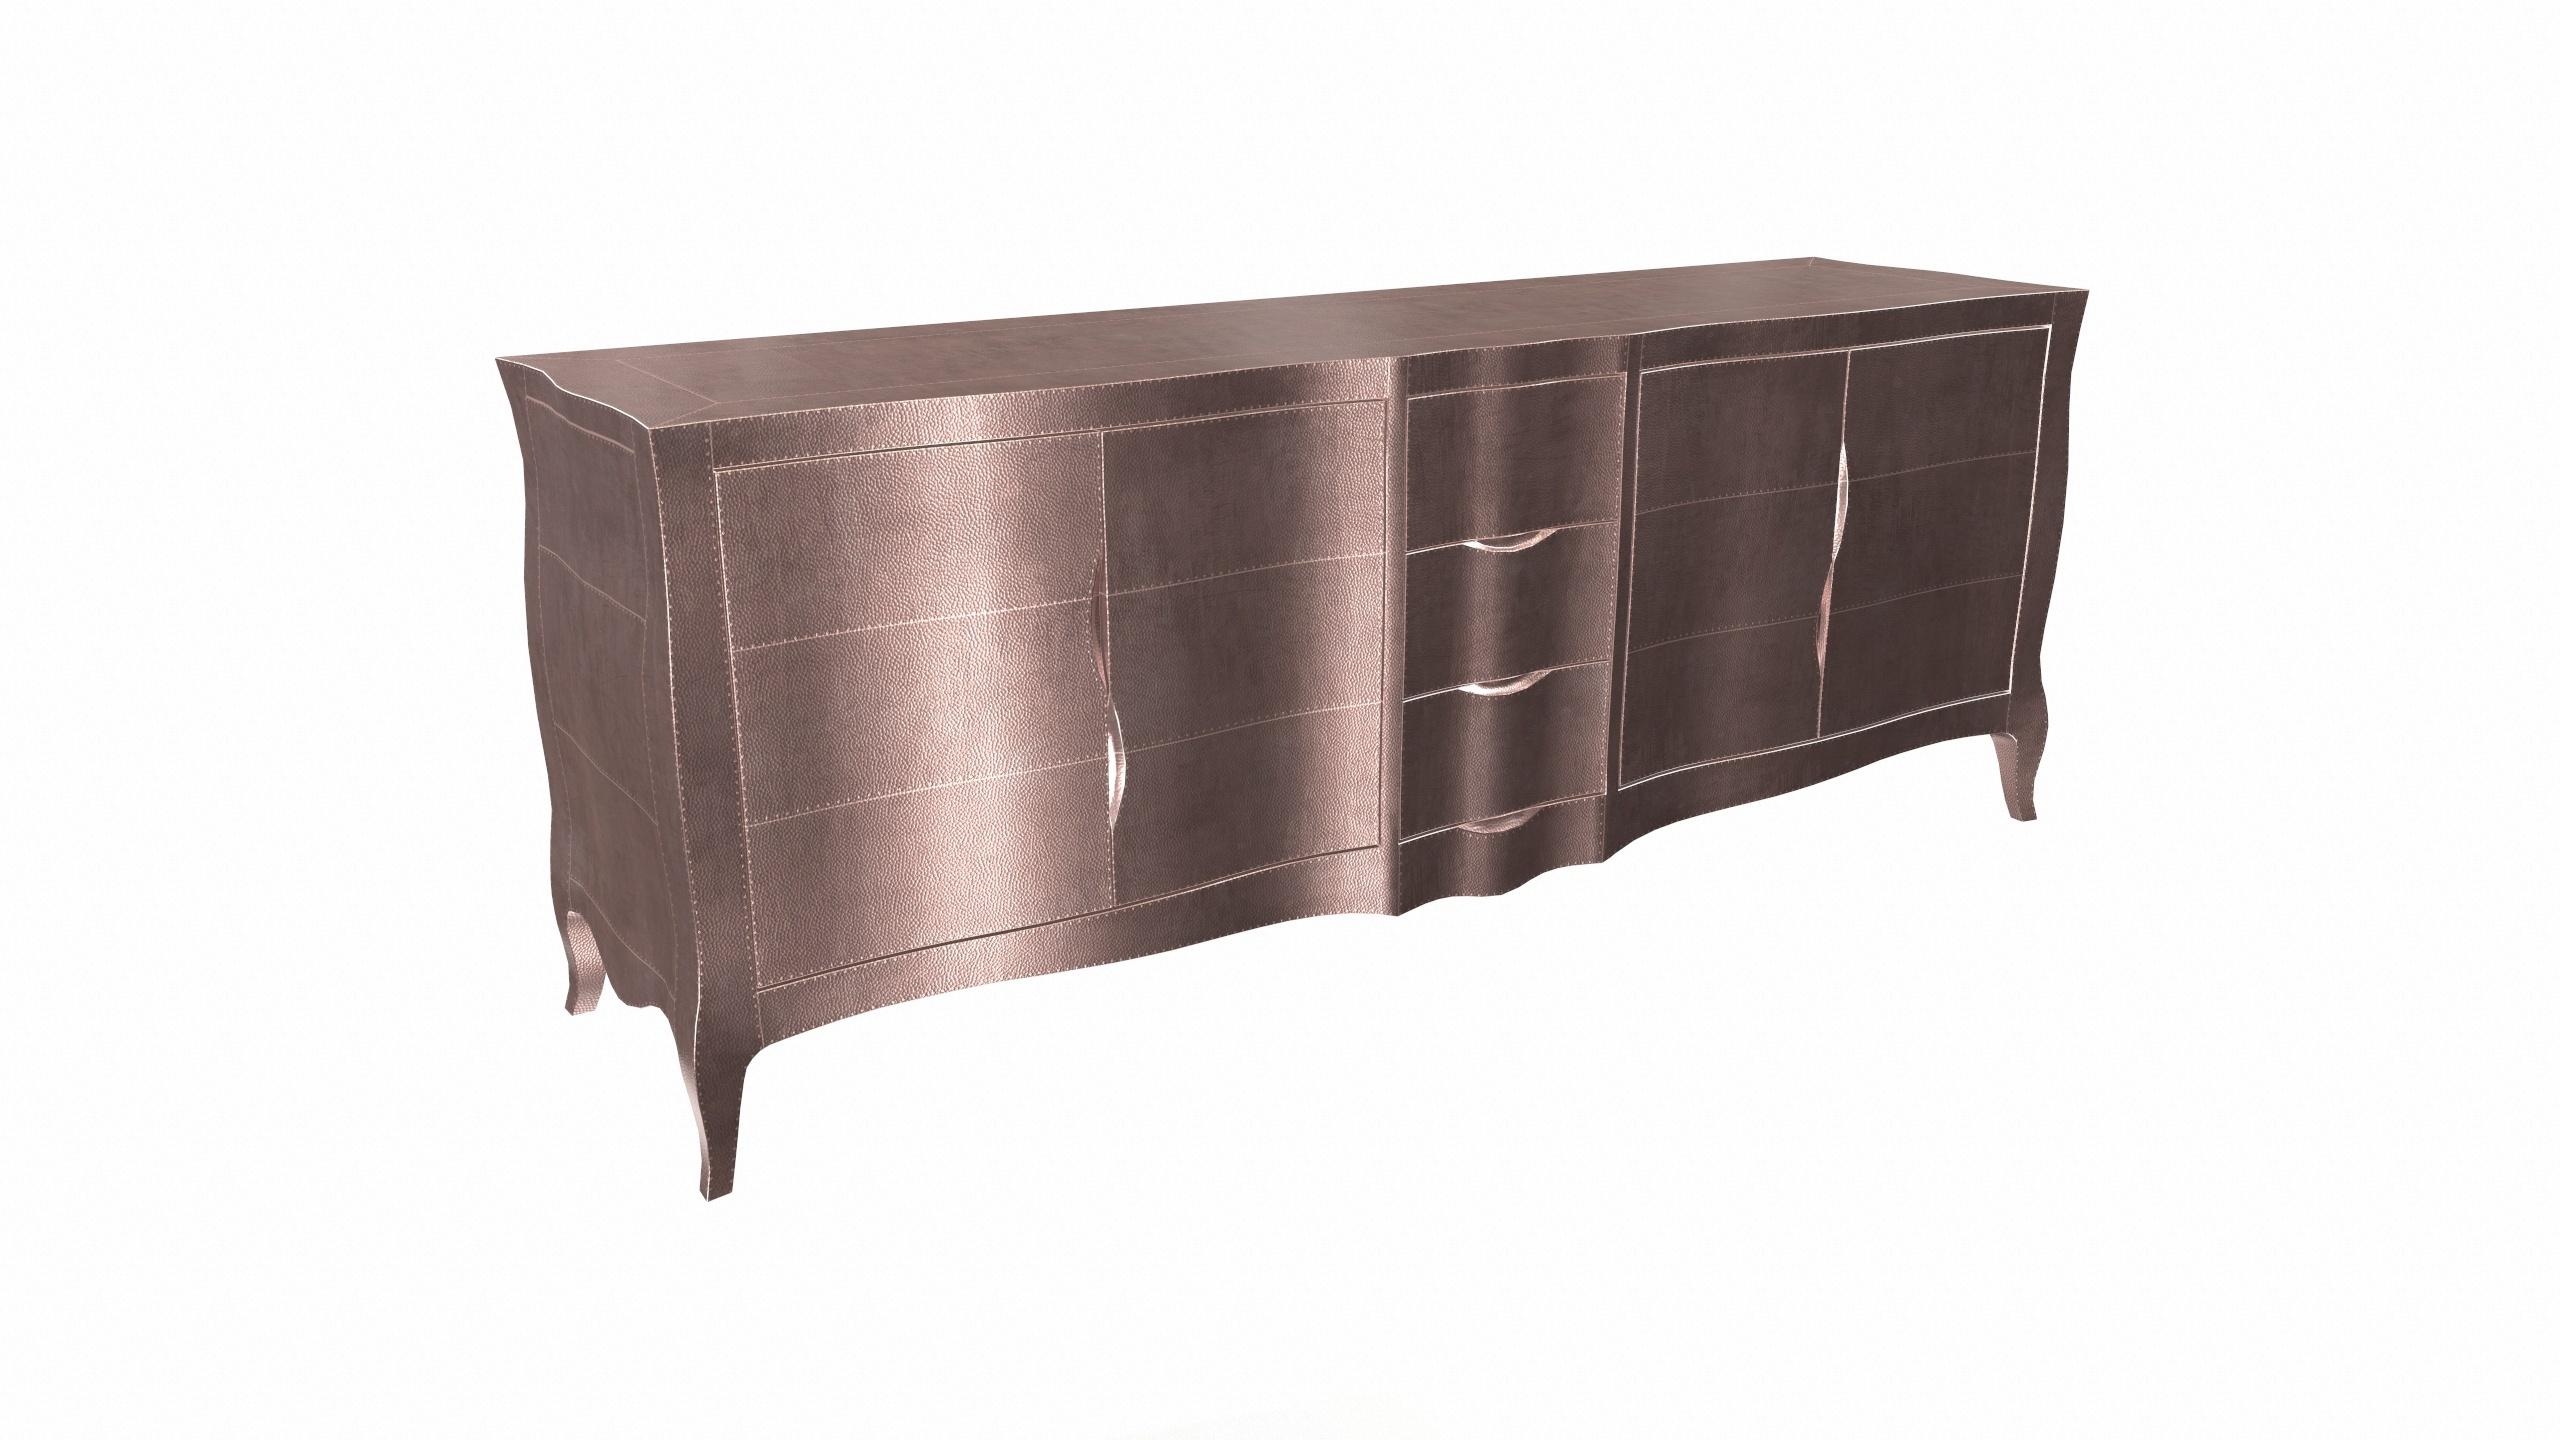 Contemporary Louise Credenza Art Deco Cupboards in Mid. Hammered Copper by Paul Mathieu For Sale